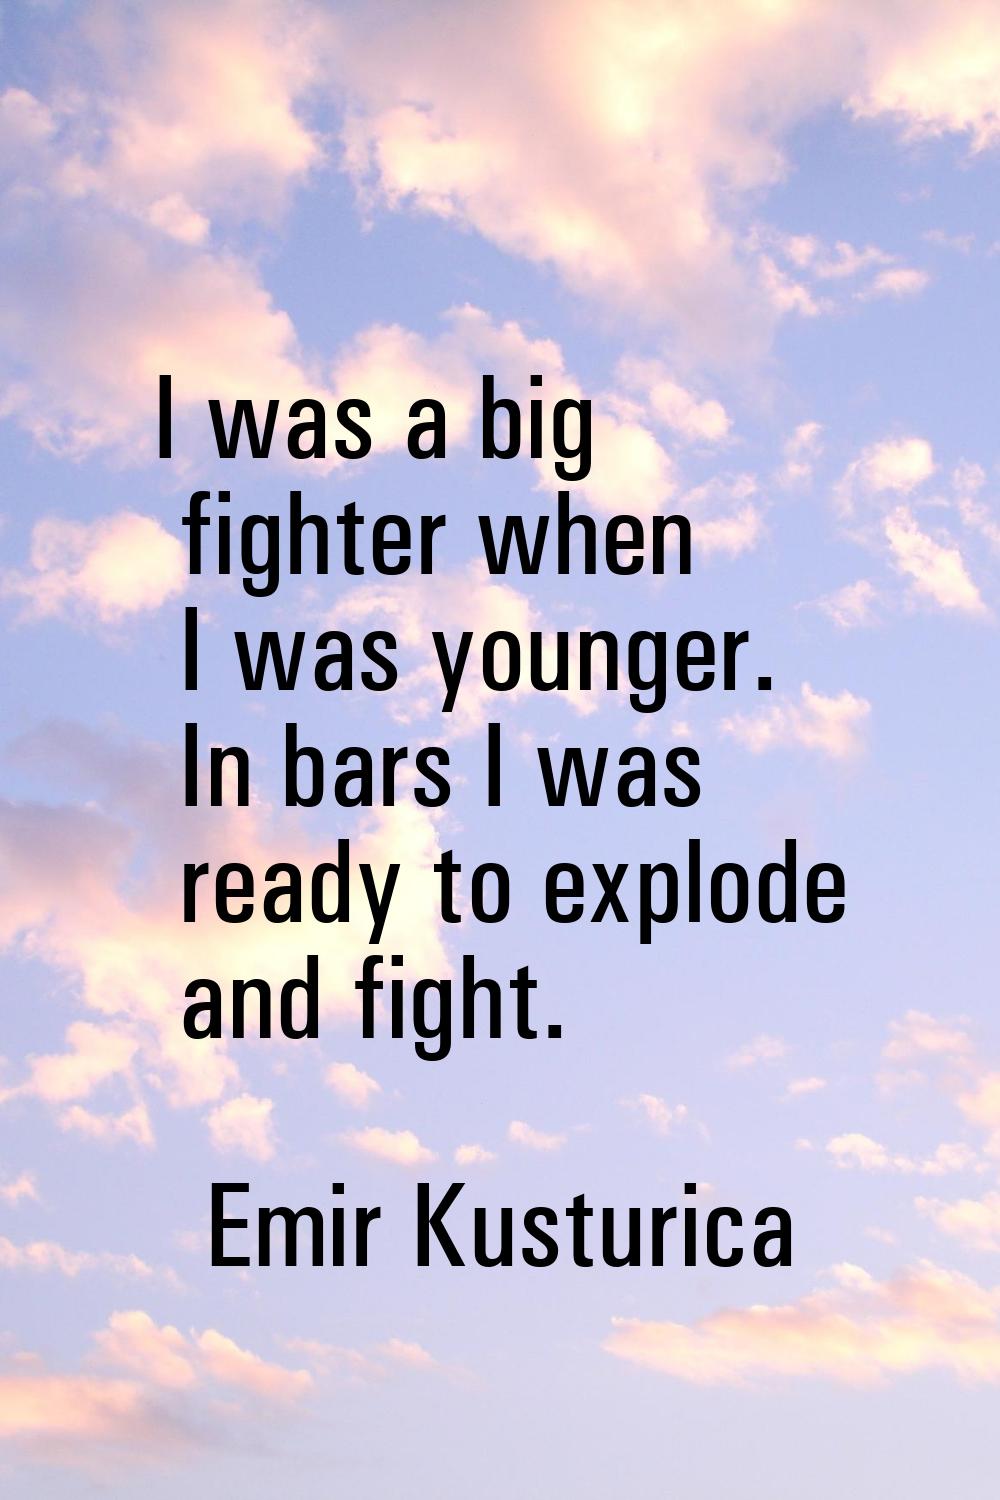 I was a big fighter when I was younger. In bars I was ready to explode and fight.